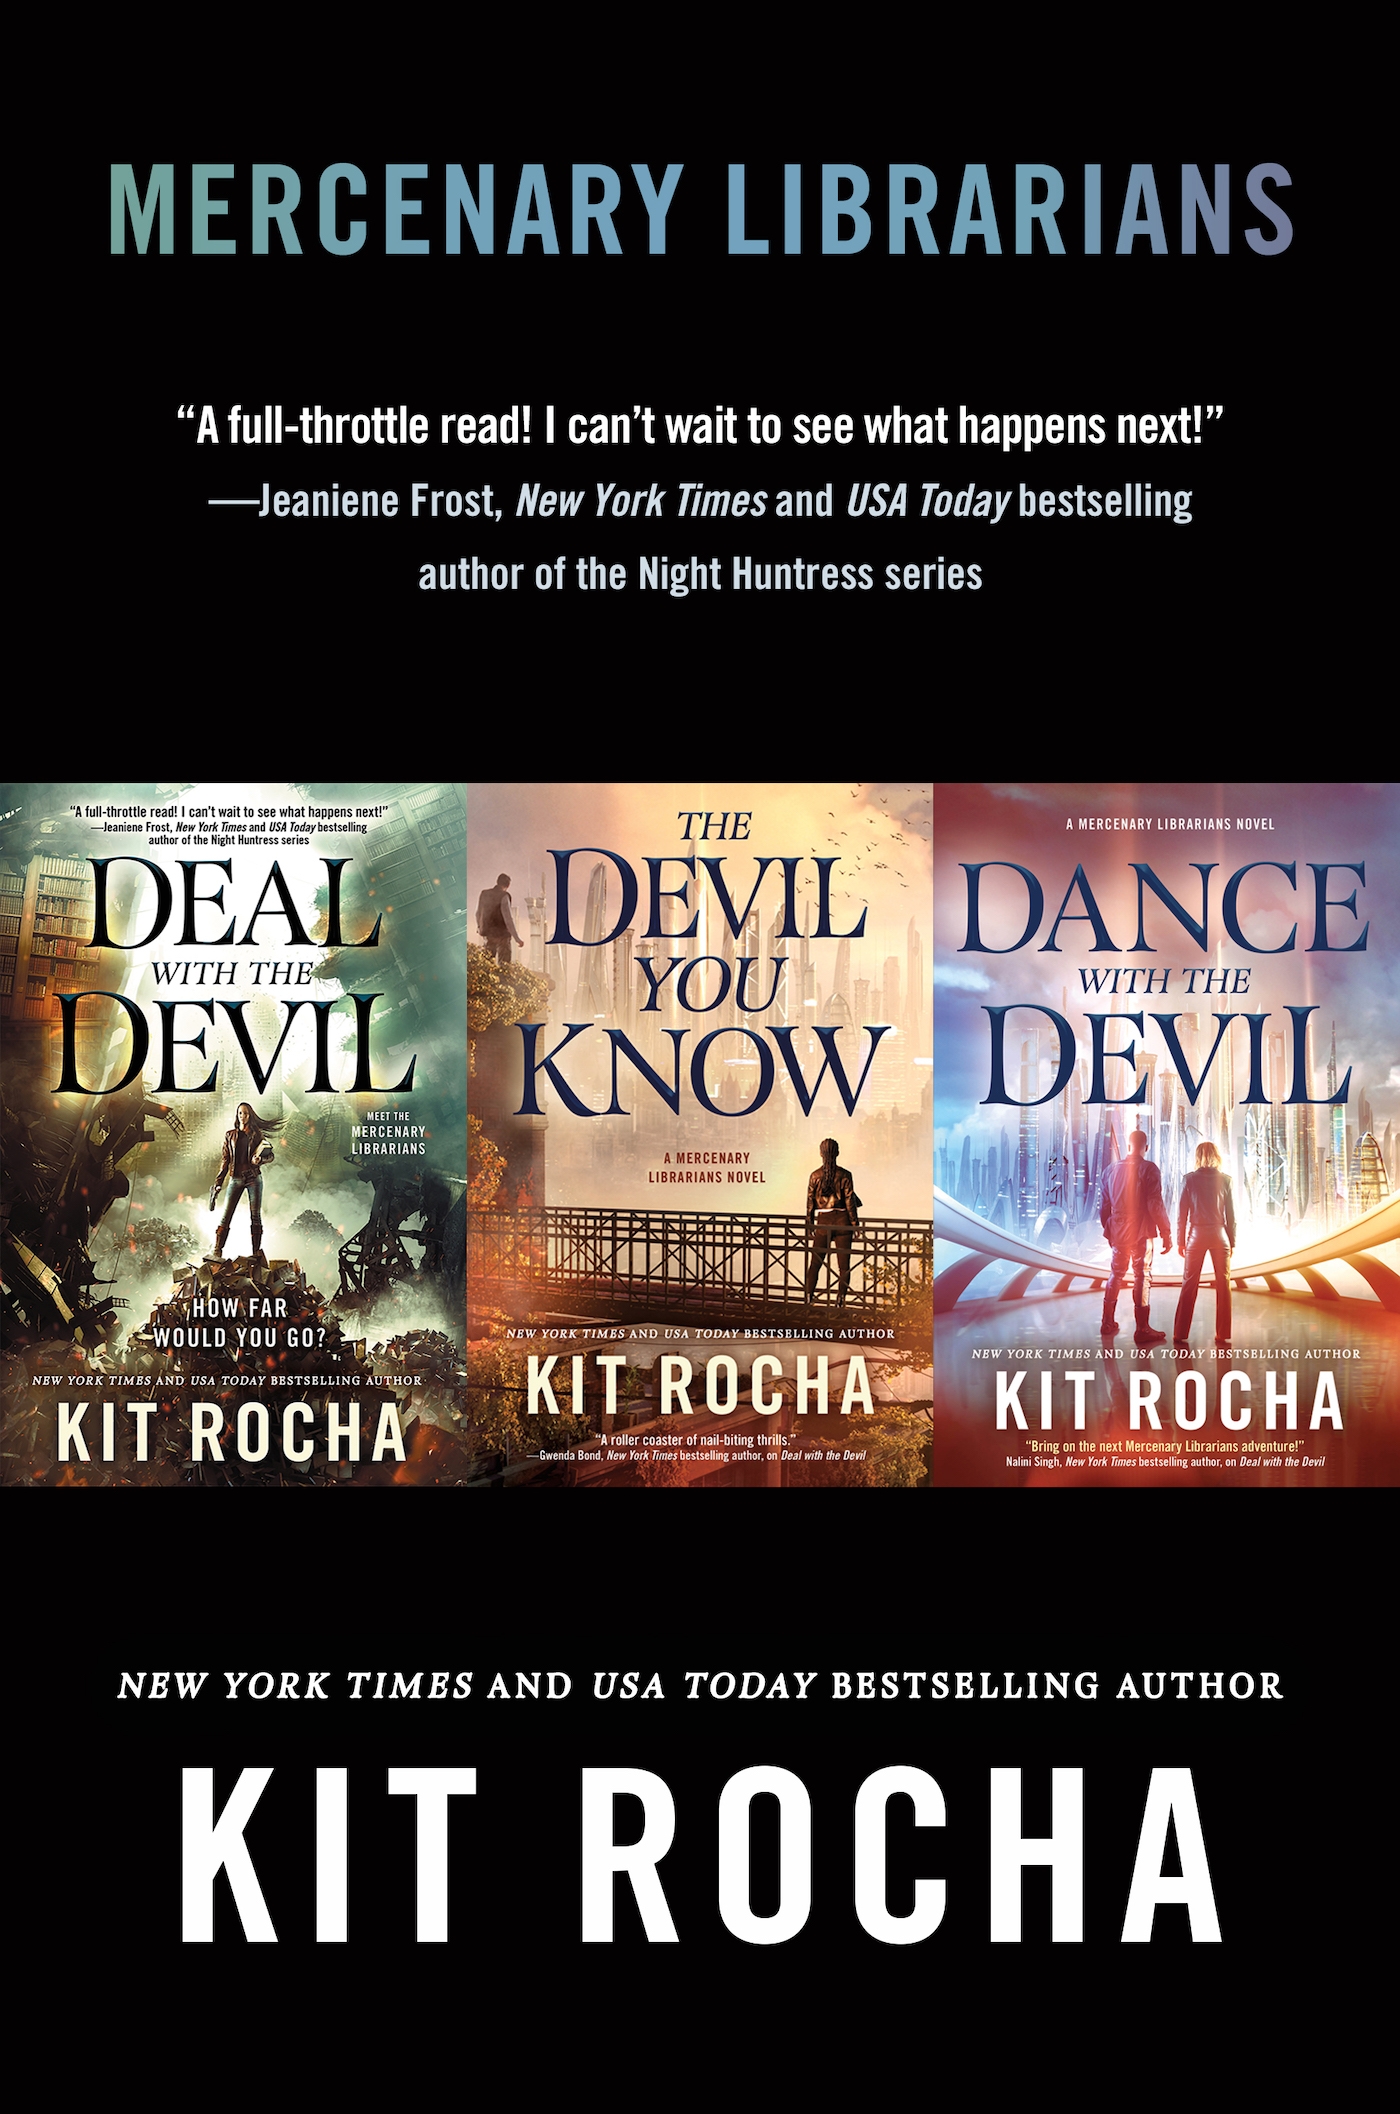 Mercenary Librarians : Deal with the Devil, The Devil You Know, Dance with the Devil by Kit Rocha